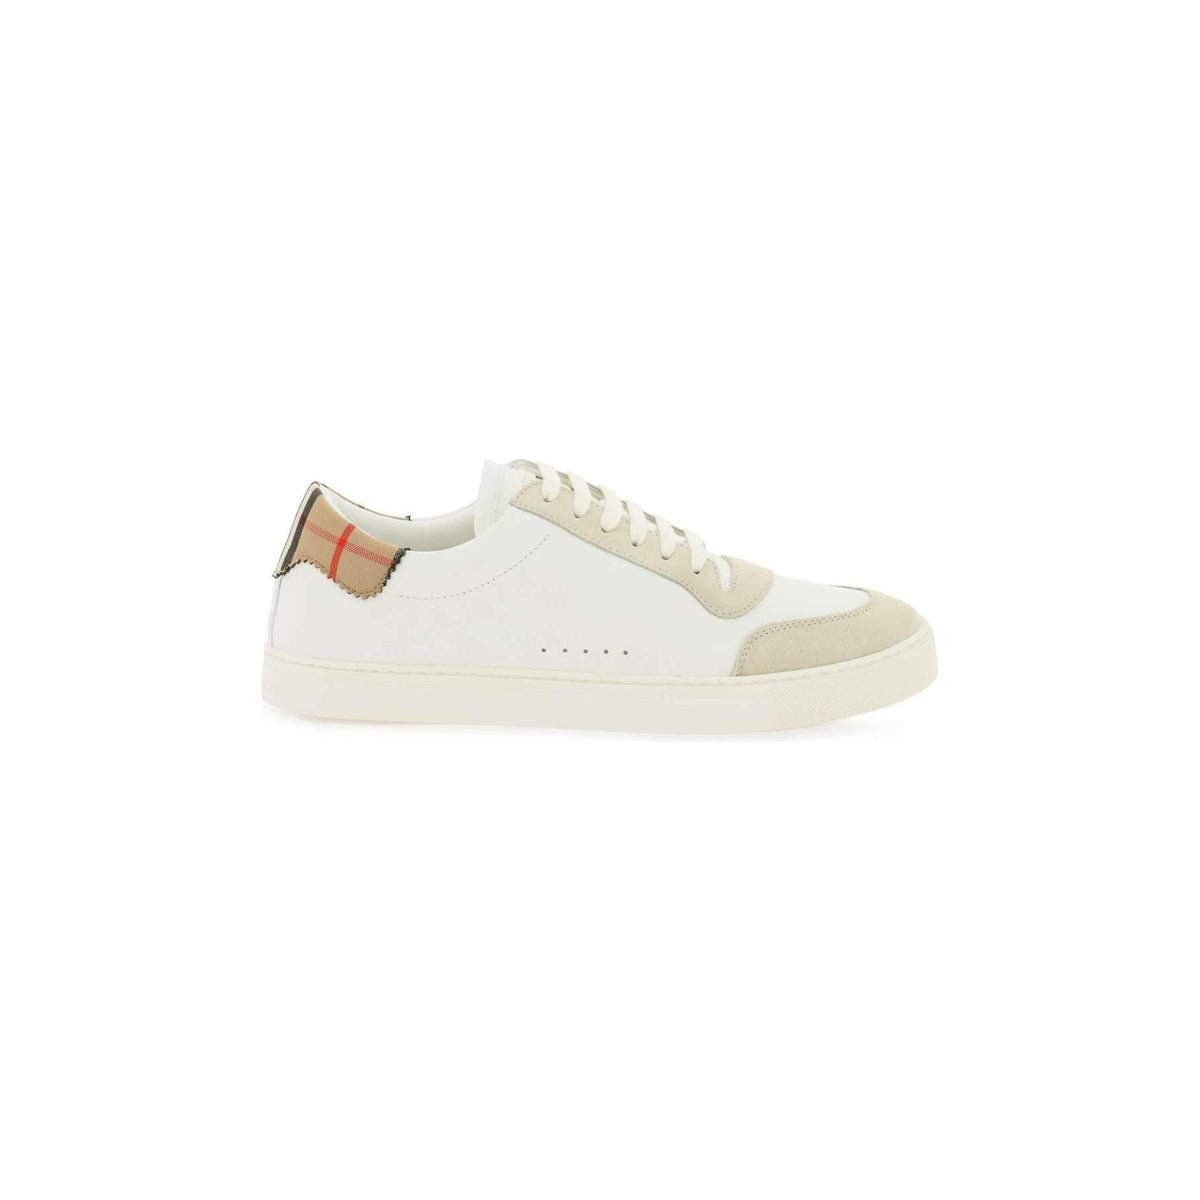 Neutral White Leather, Suede and Check Cotton Sneakers BURBERRY JOHN JULIA.